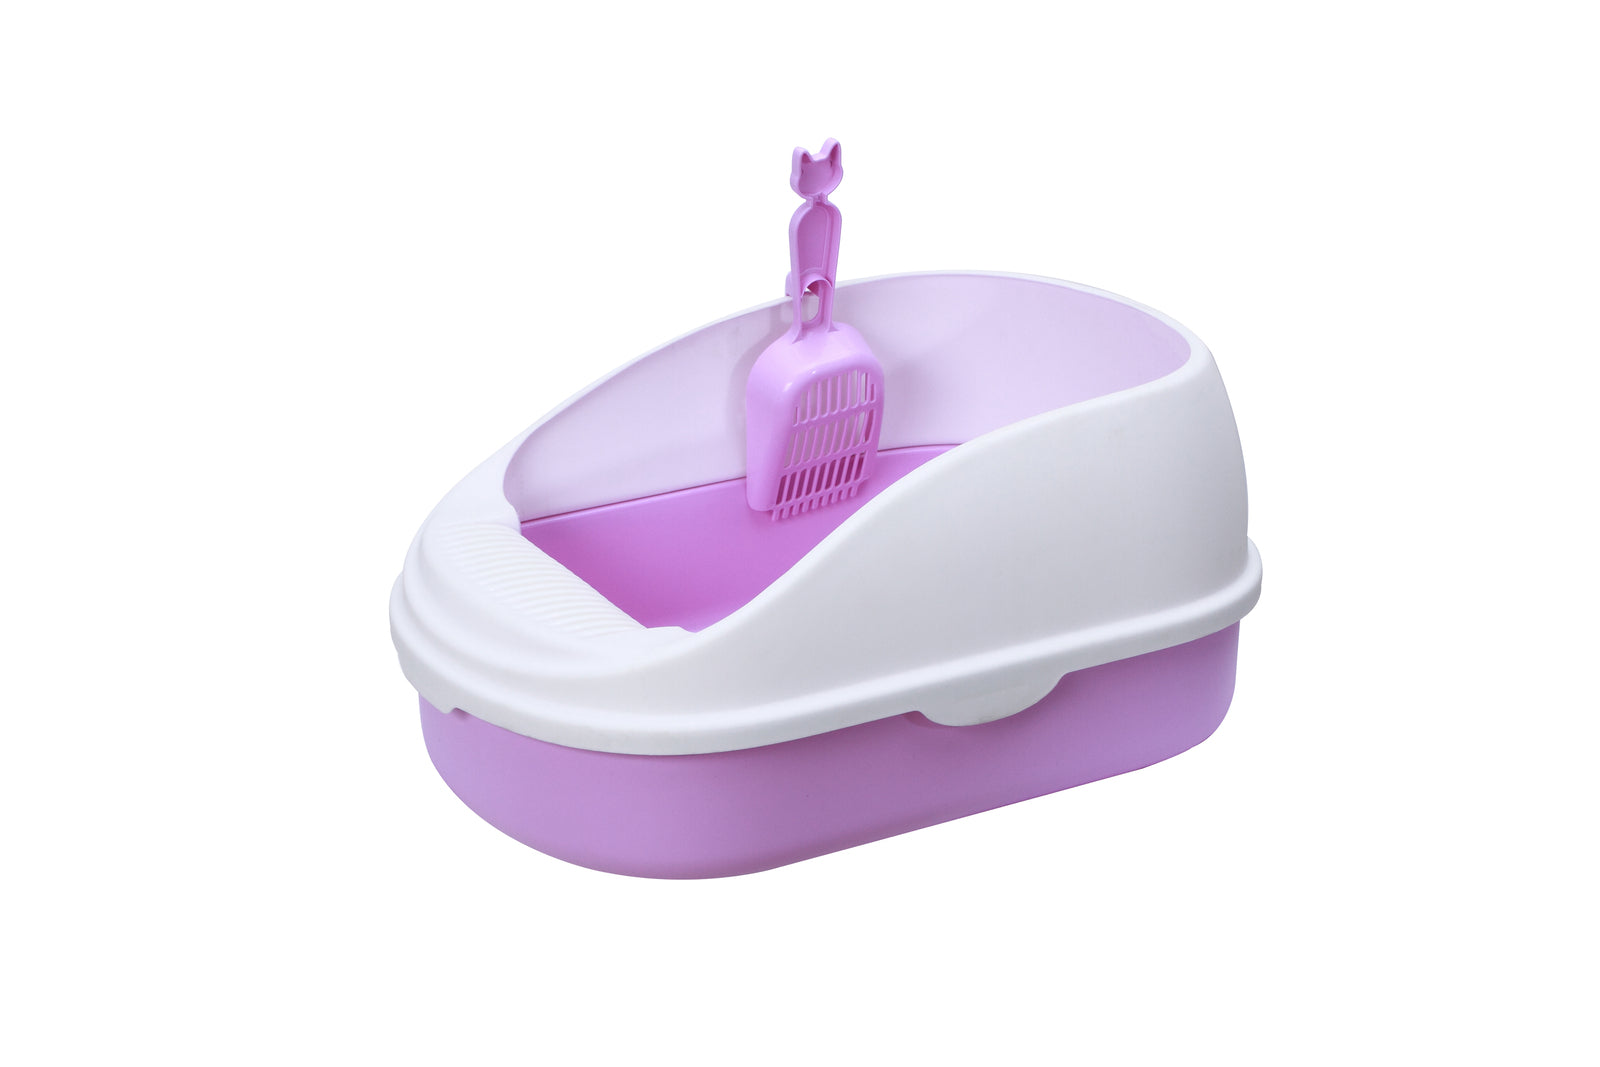 YES4PETS Medium Portable Cat Toilet Litter Box Tray with Scoop Purple